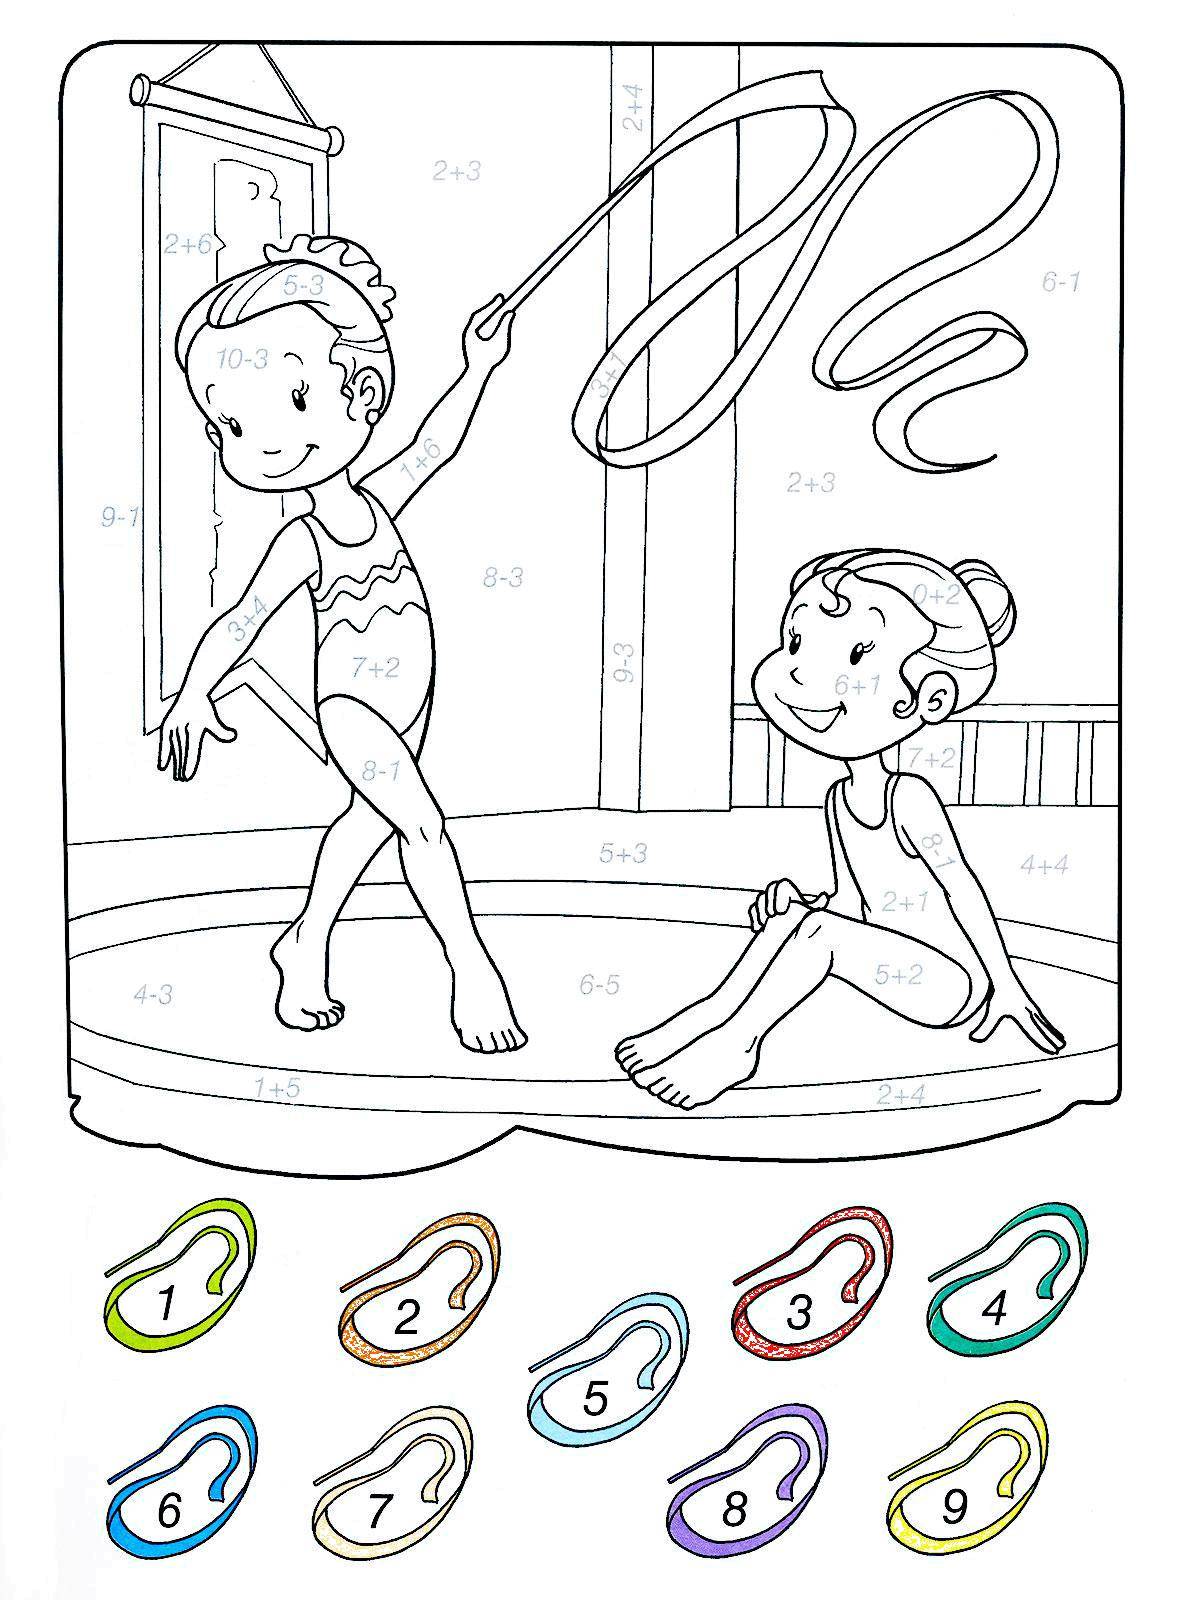 Coloring Color of gymnasts solving examples. Category mathematical coloring pages. Tags:  sports, exercises, examples.